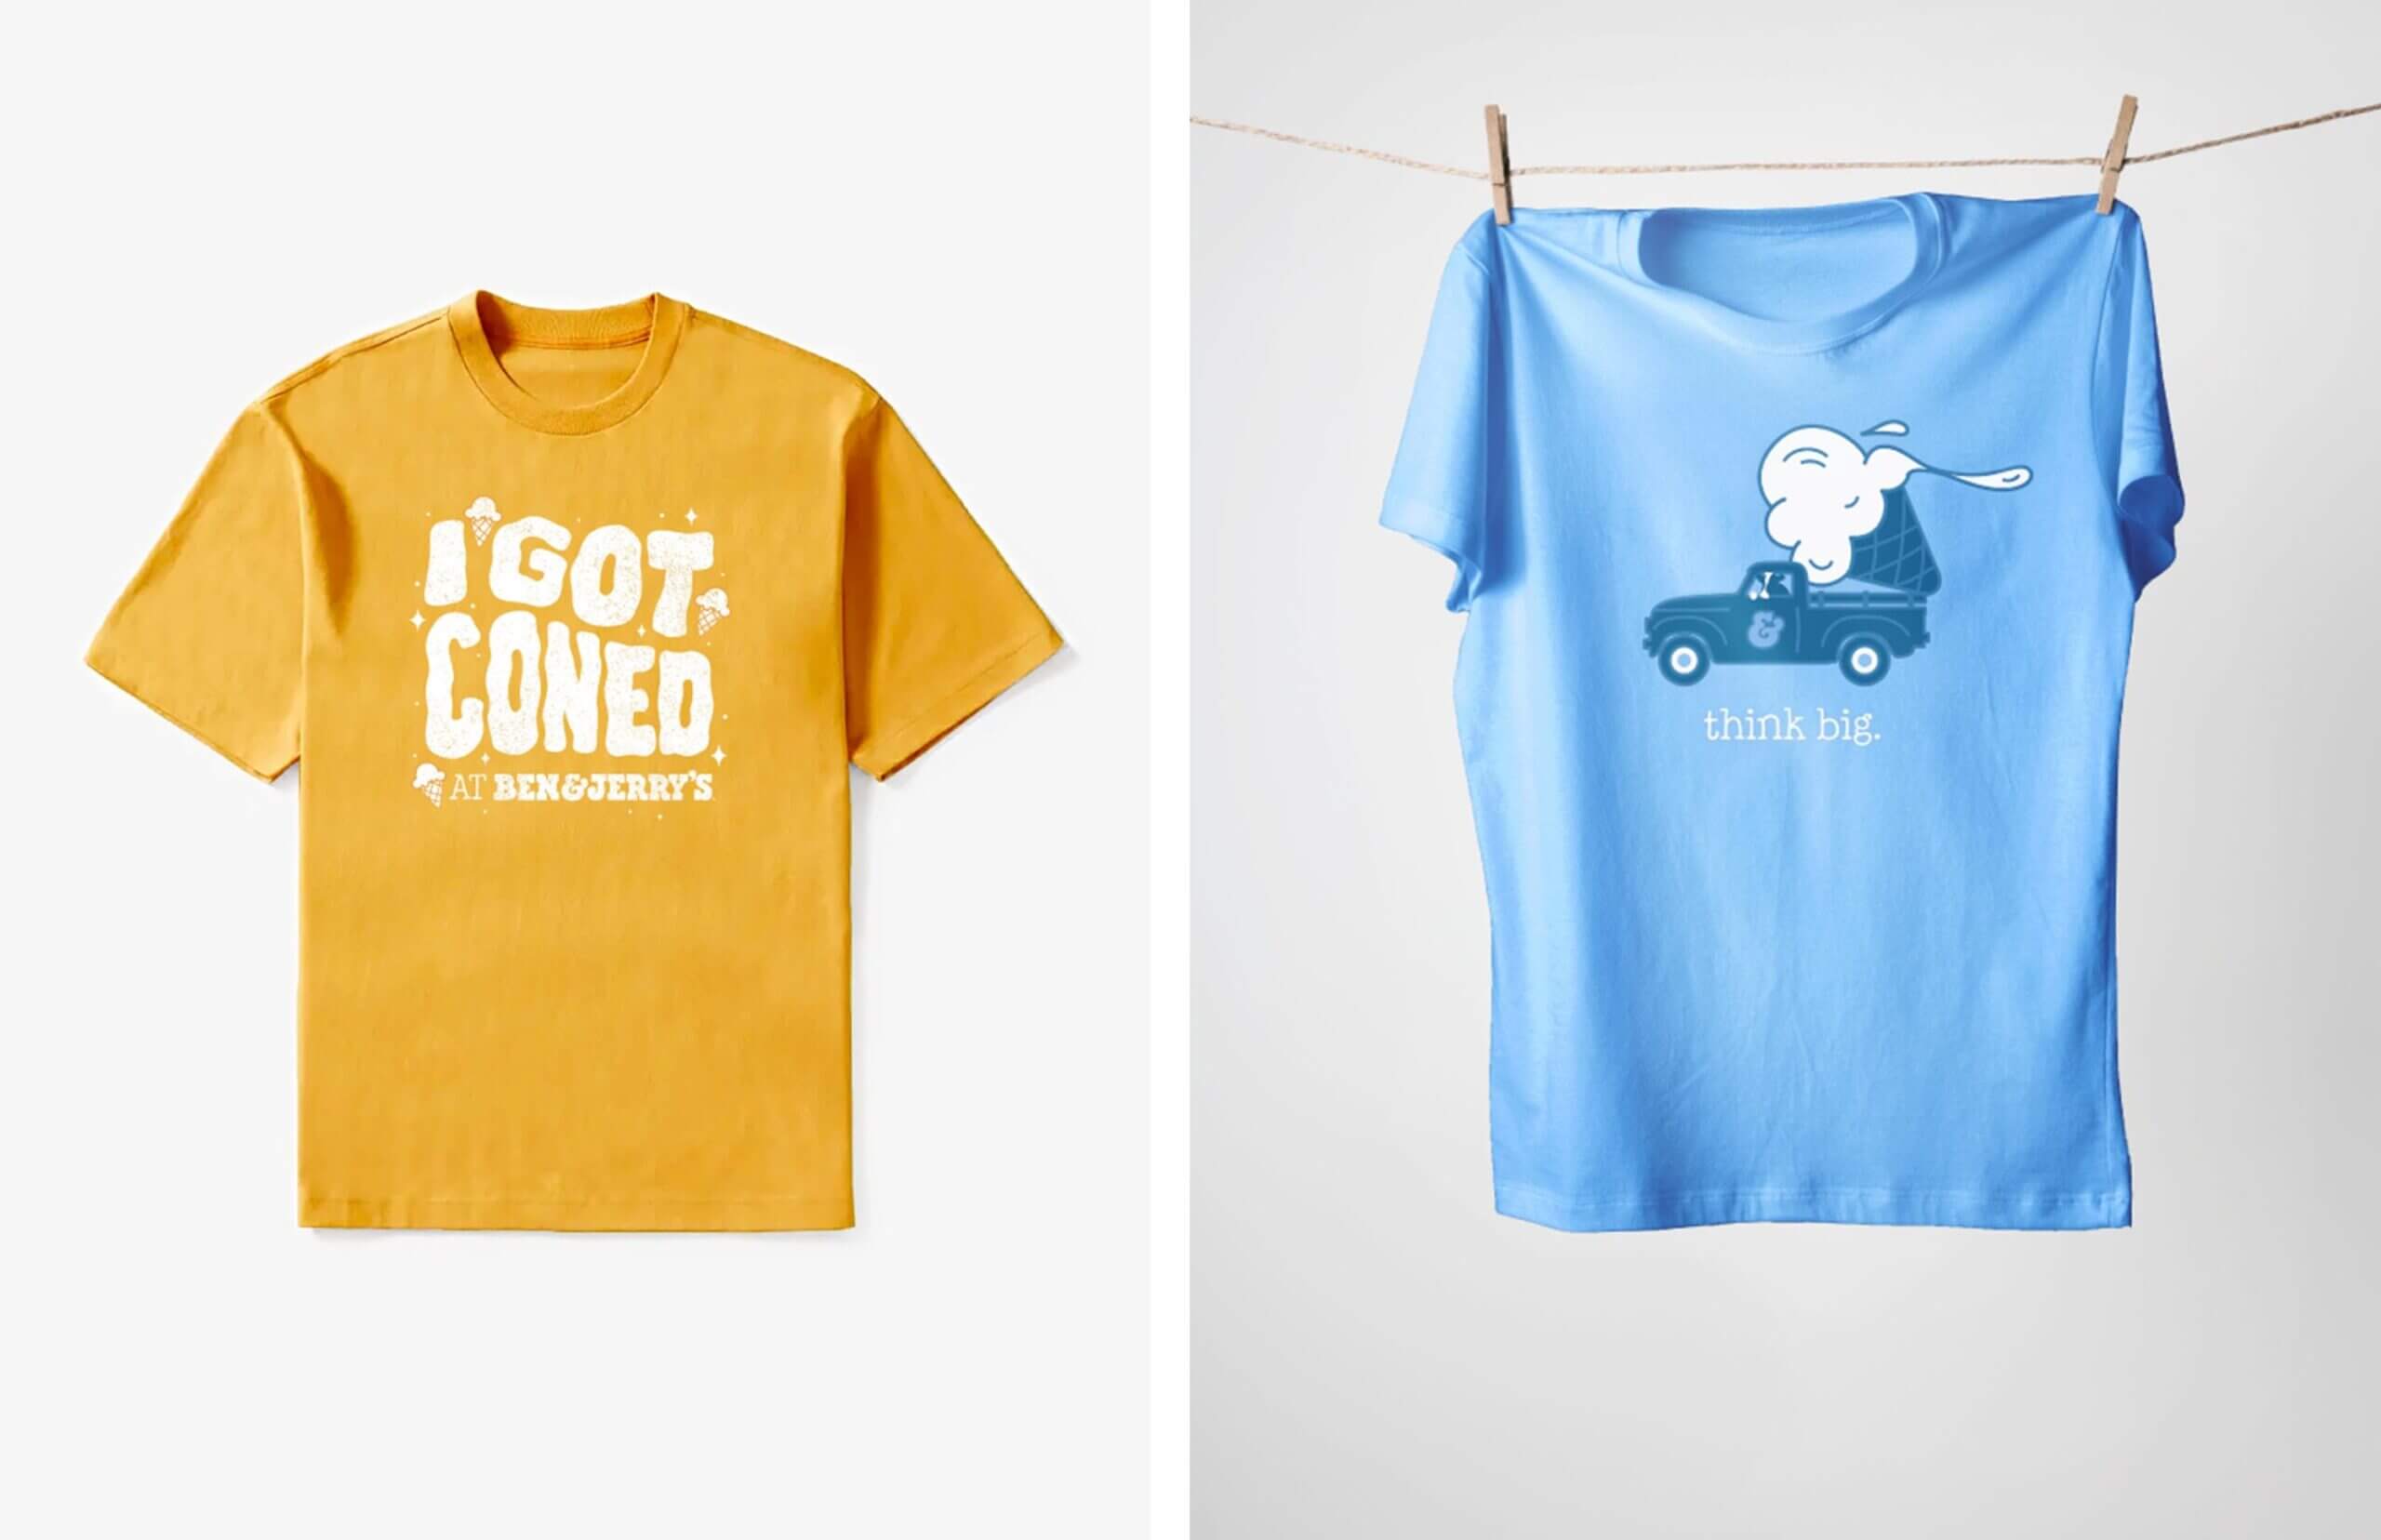 Two Ben & Jerry's tshirts